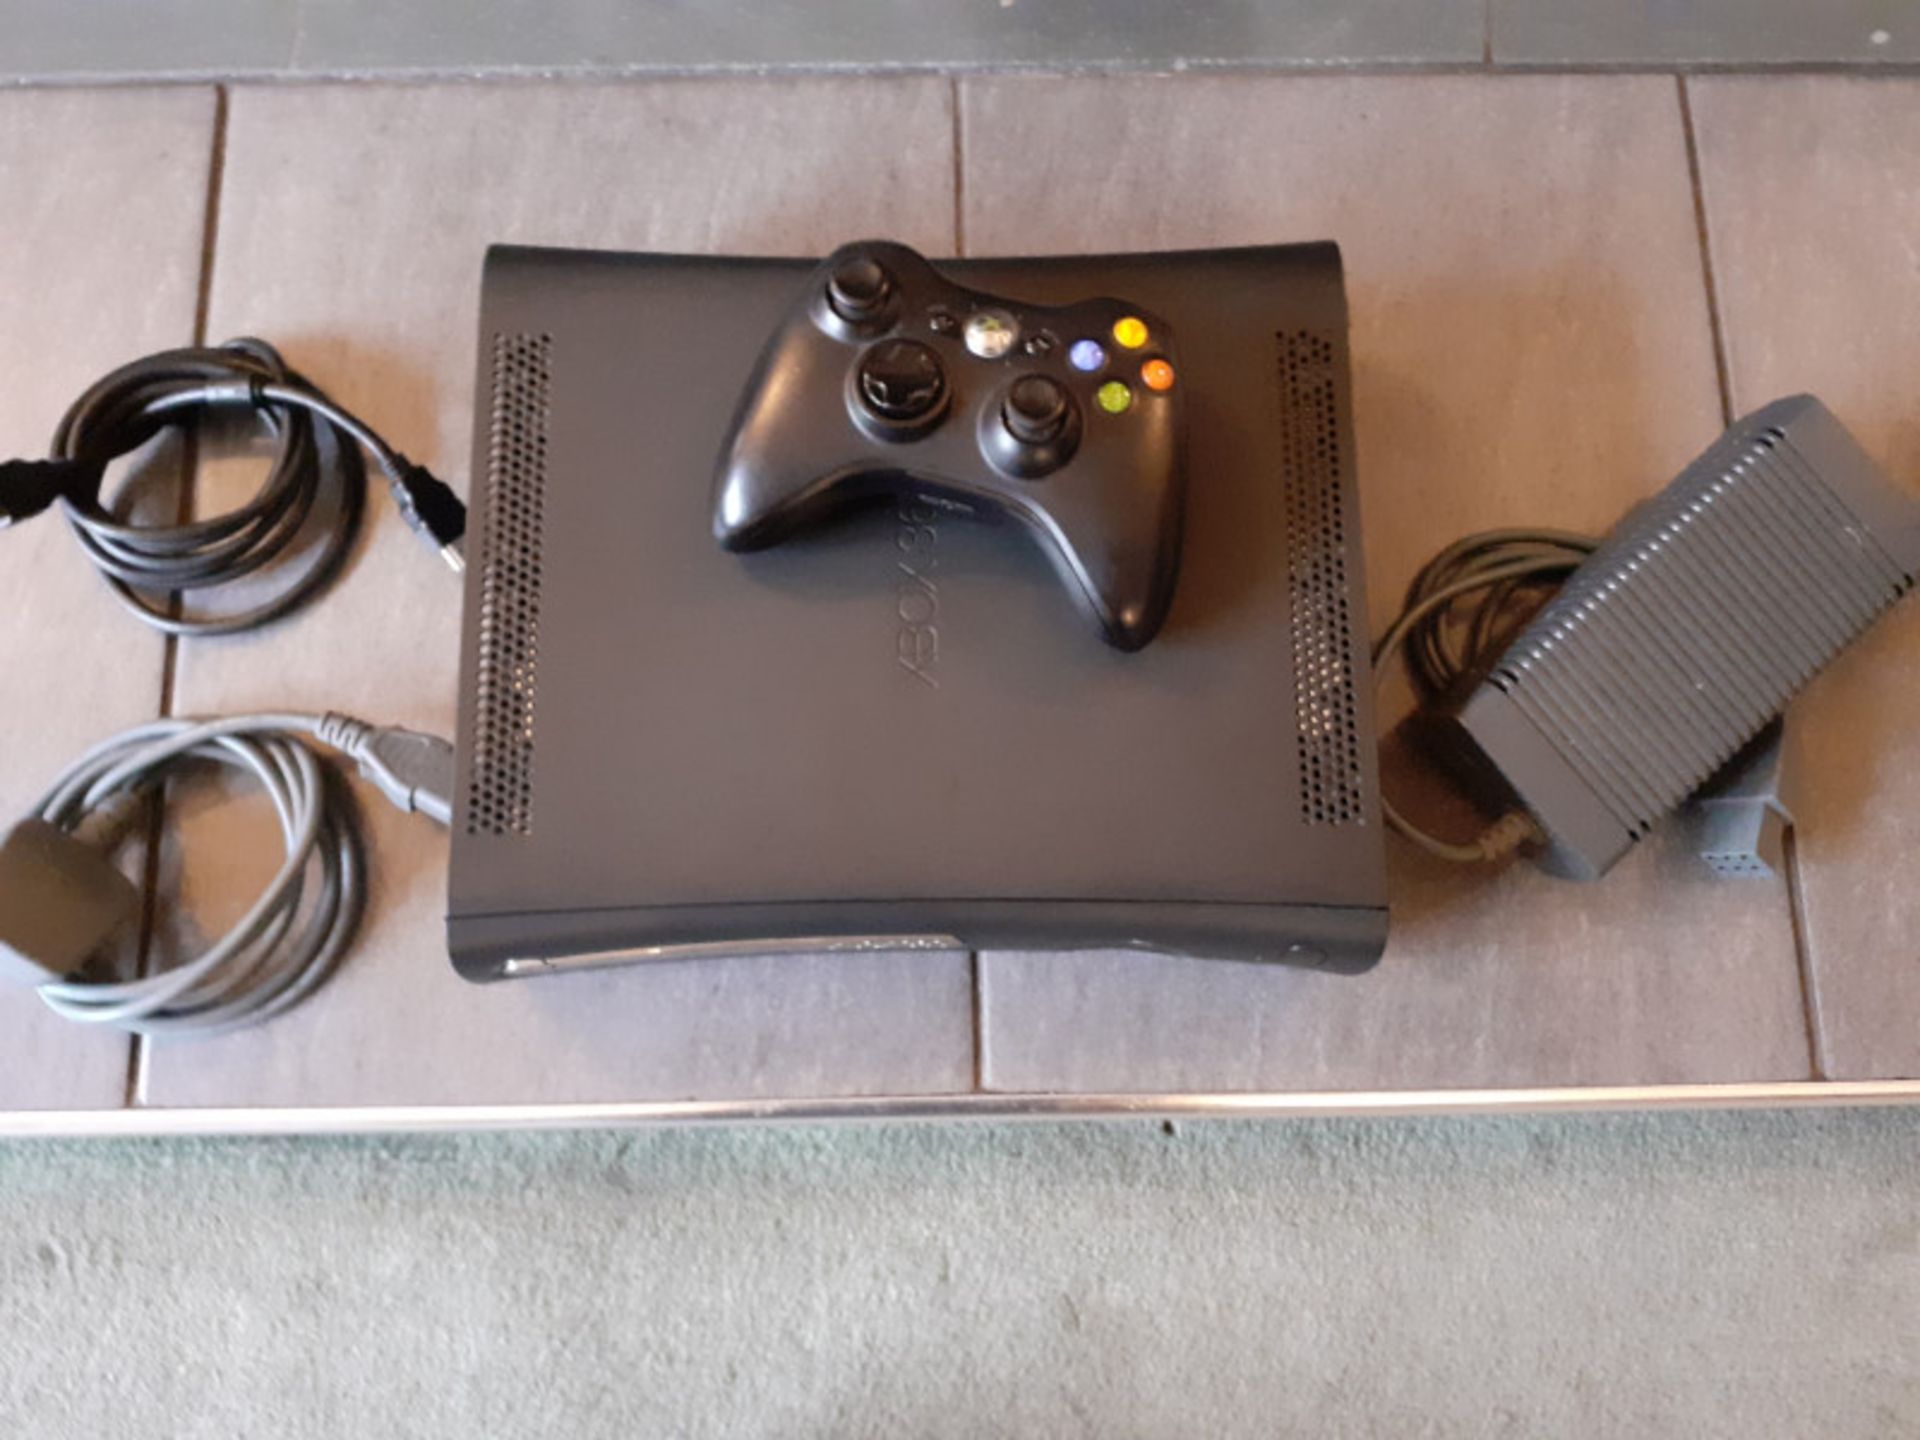 Xbox 360 games console with controller, power lead, HDMI cable (no hard drive) - Image 2 of 3